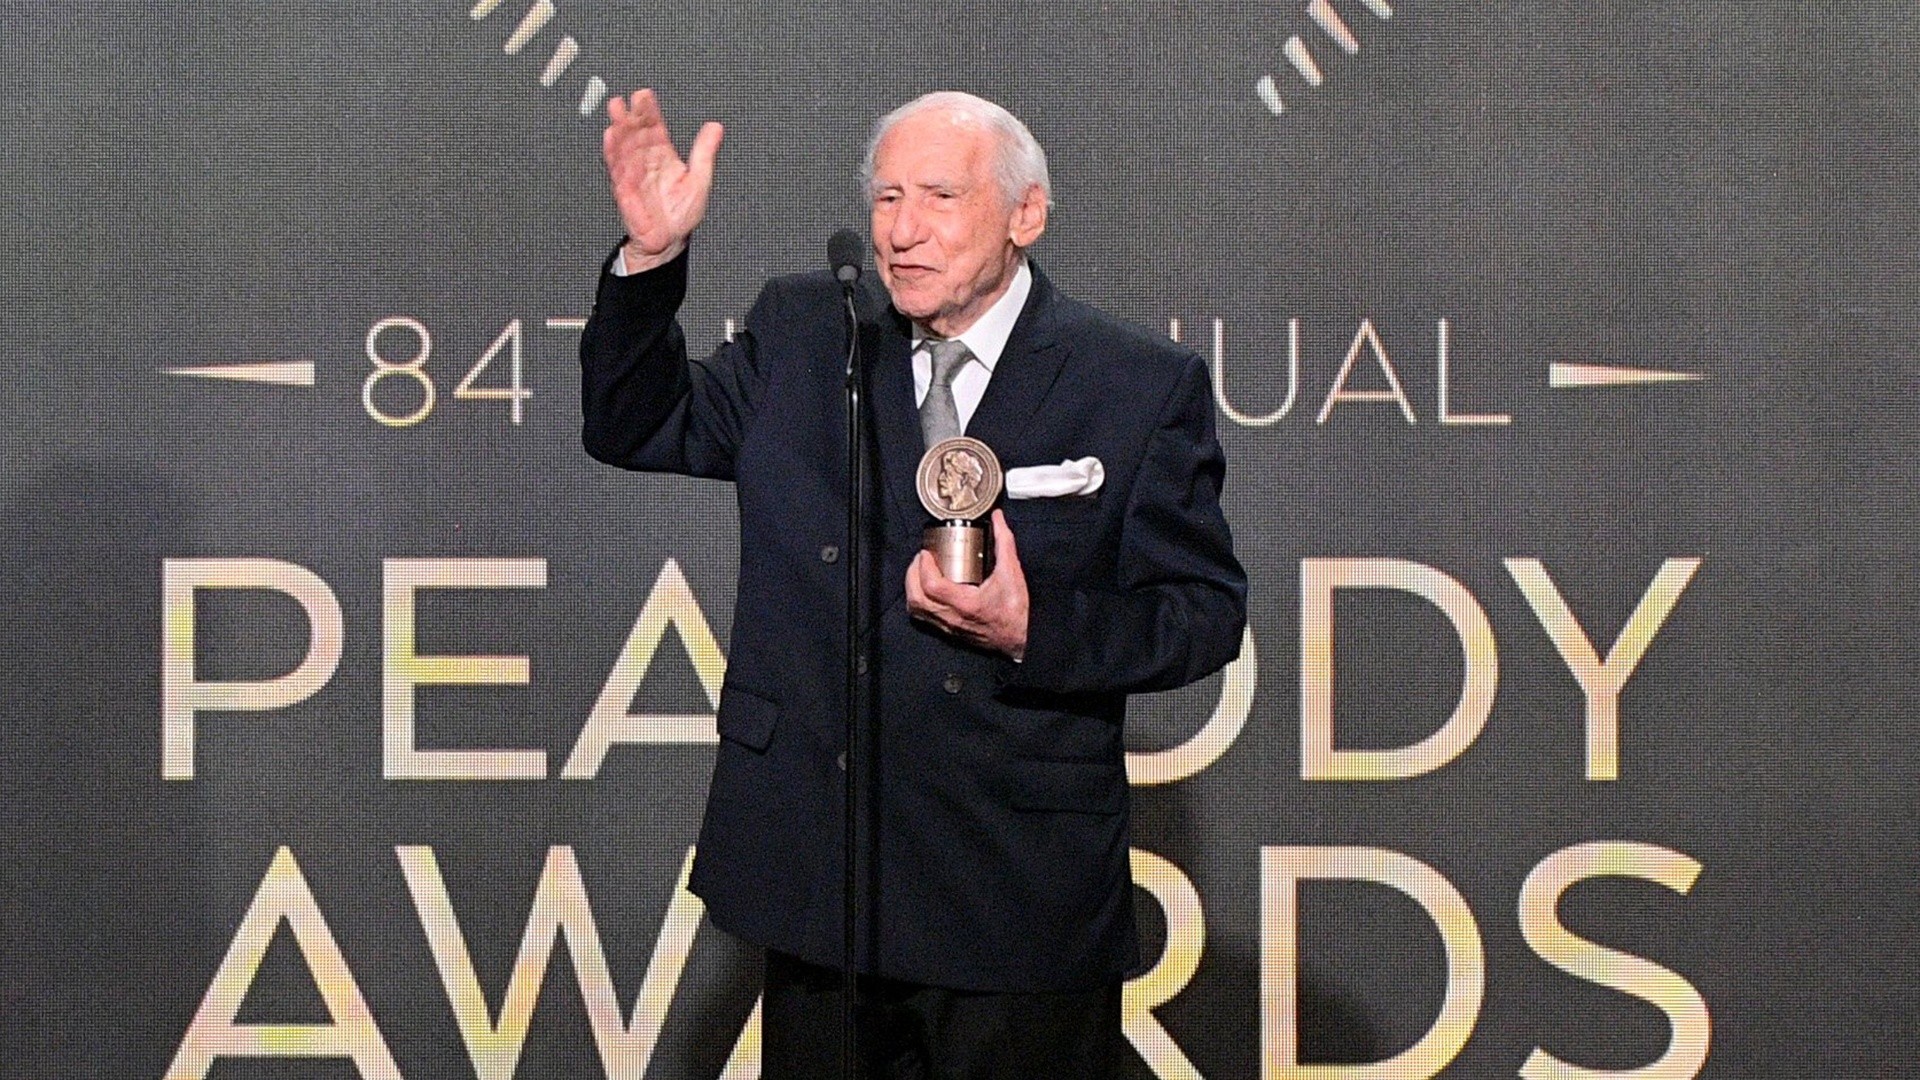 Mel Brooks becomes 4th person in history to earn PEGOT status